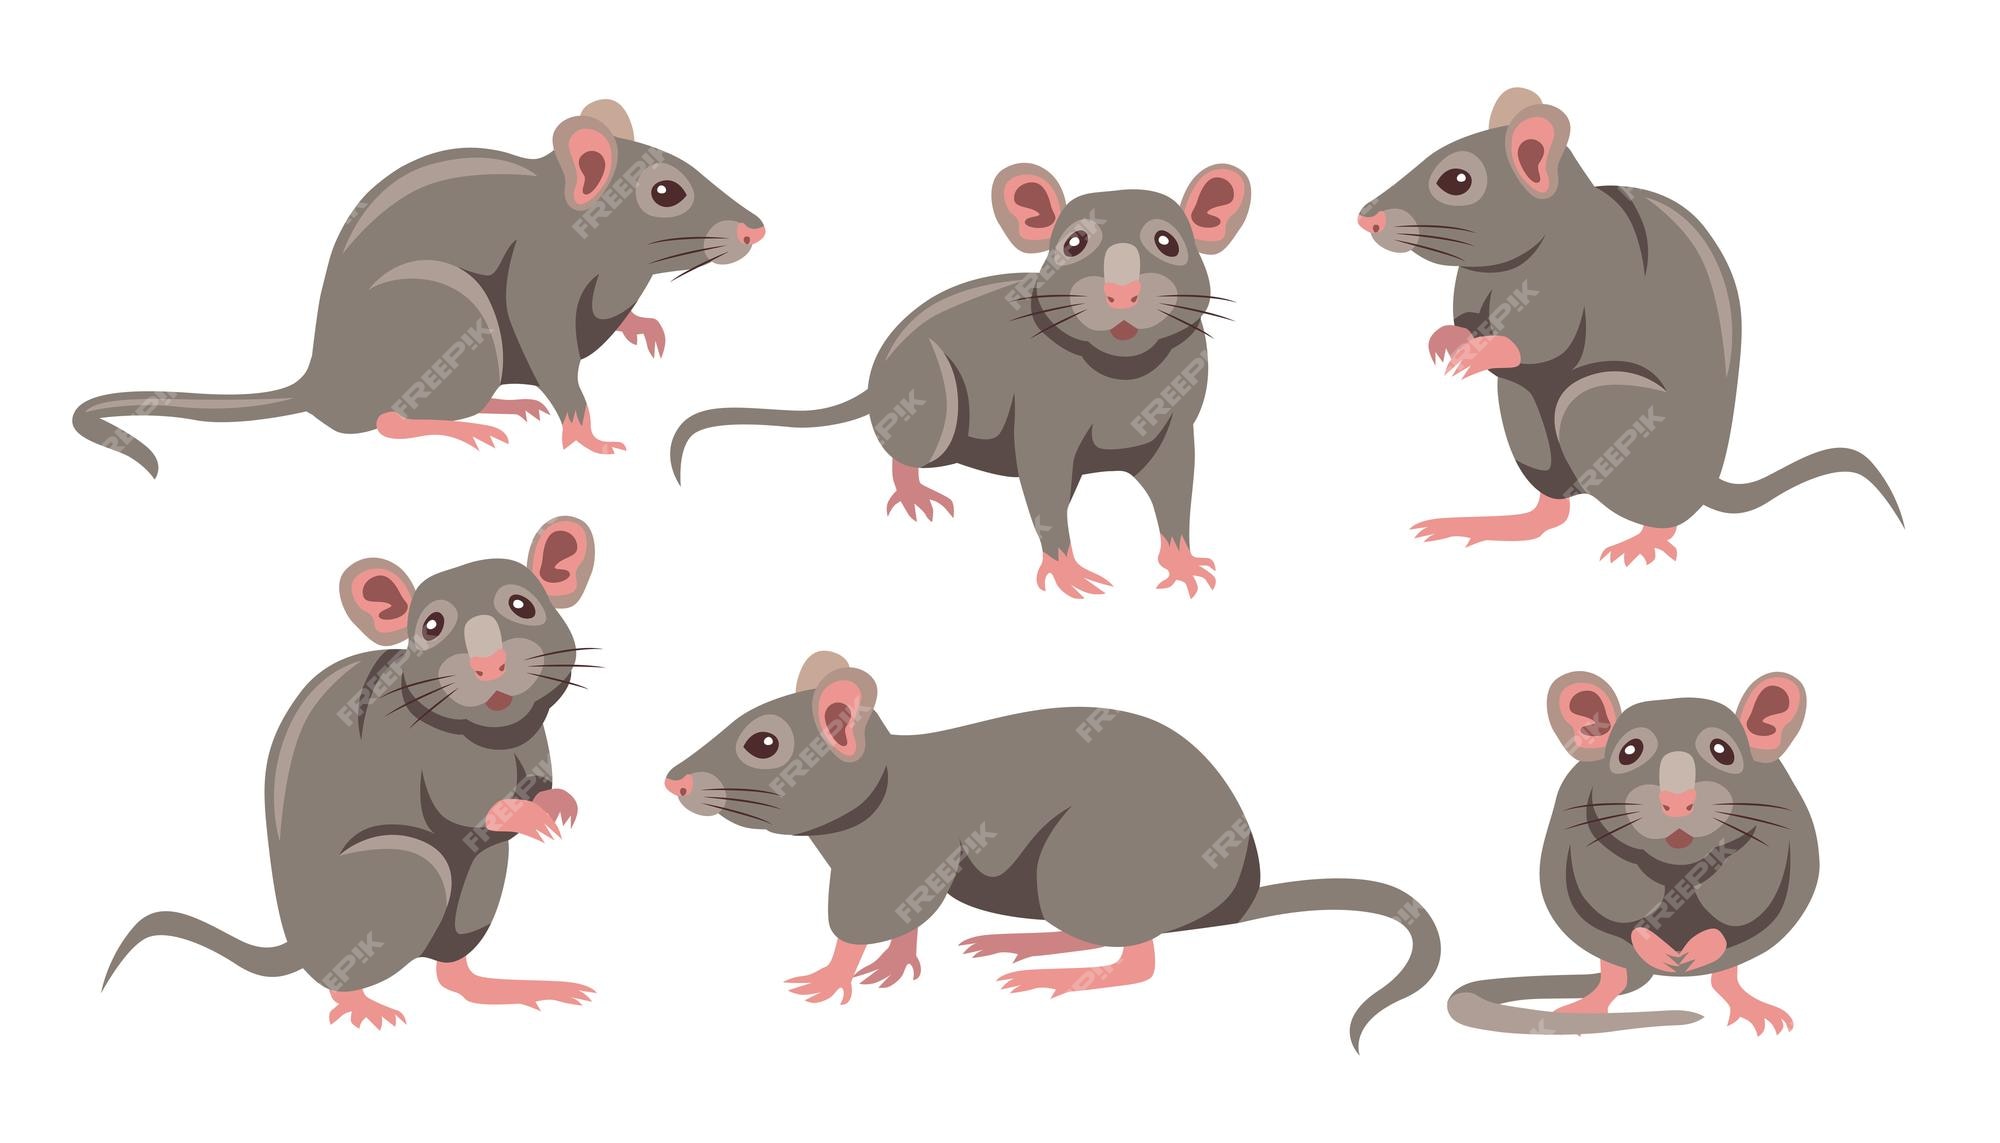 Free Vector | Cute grey mouse in different poses cartoon illustration set.  little house mice or rat character with long tail isolated on white  background. animal, rodent concept